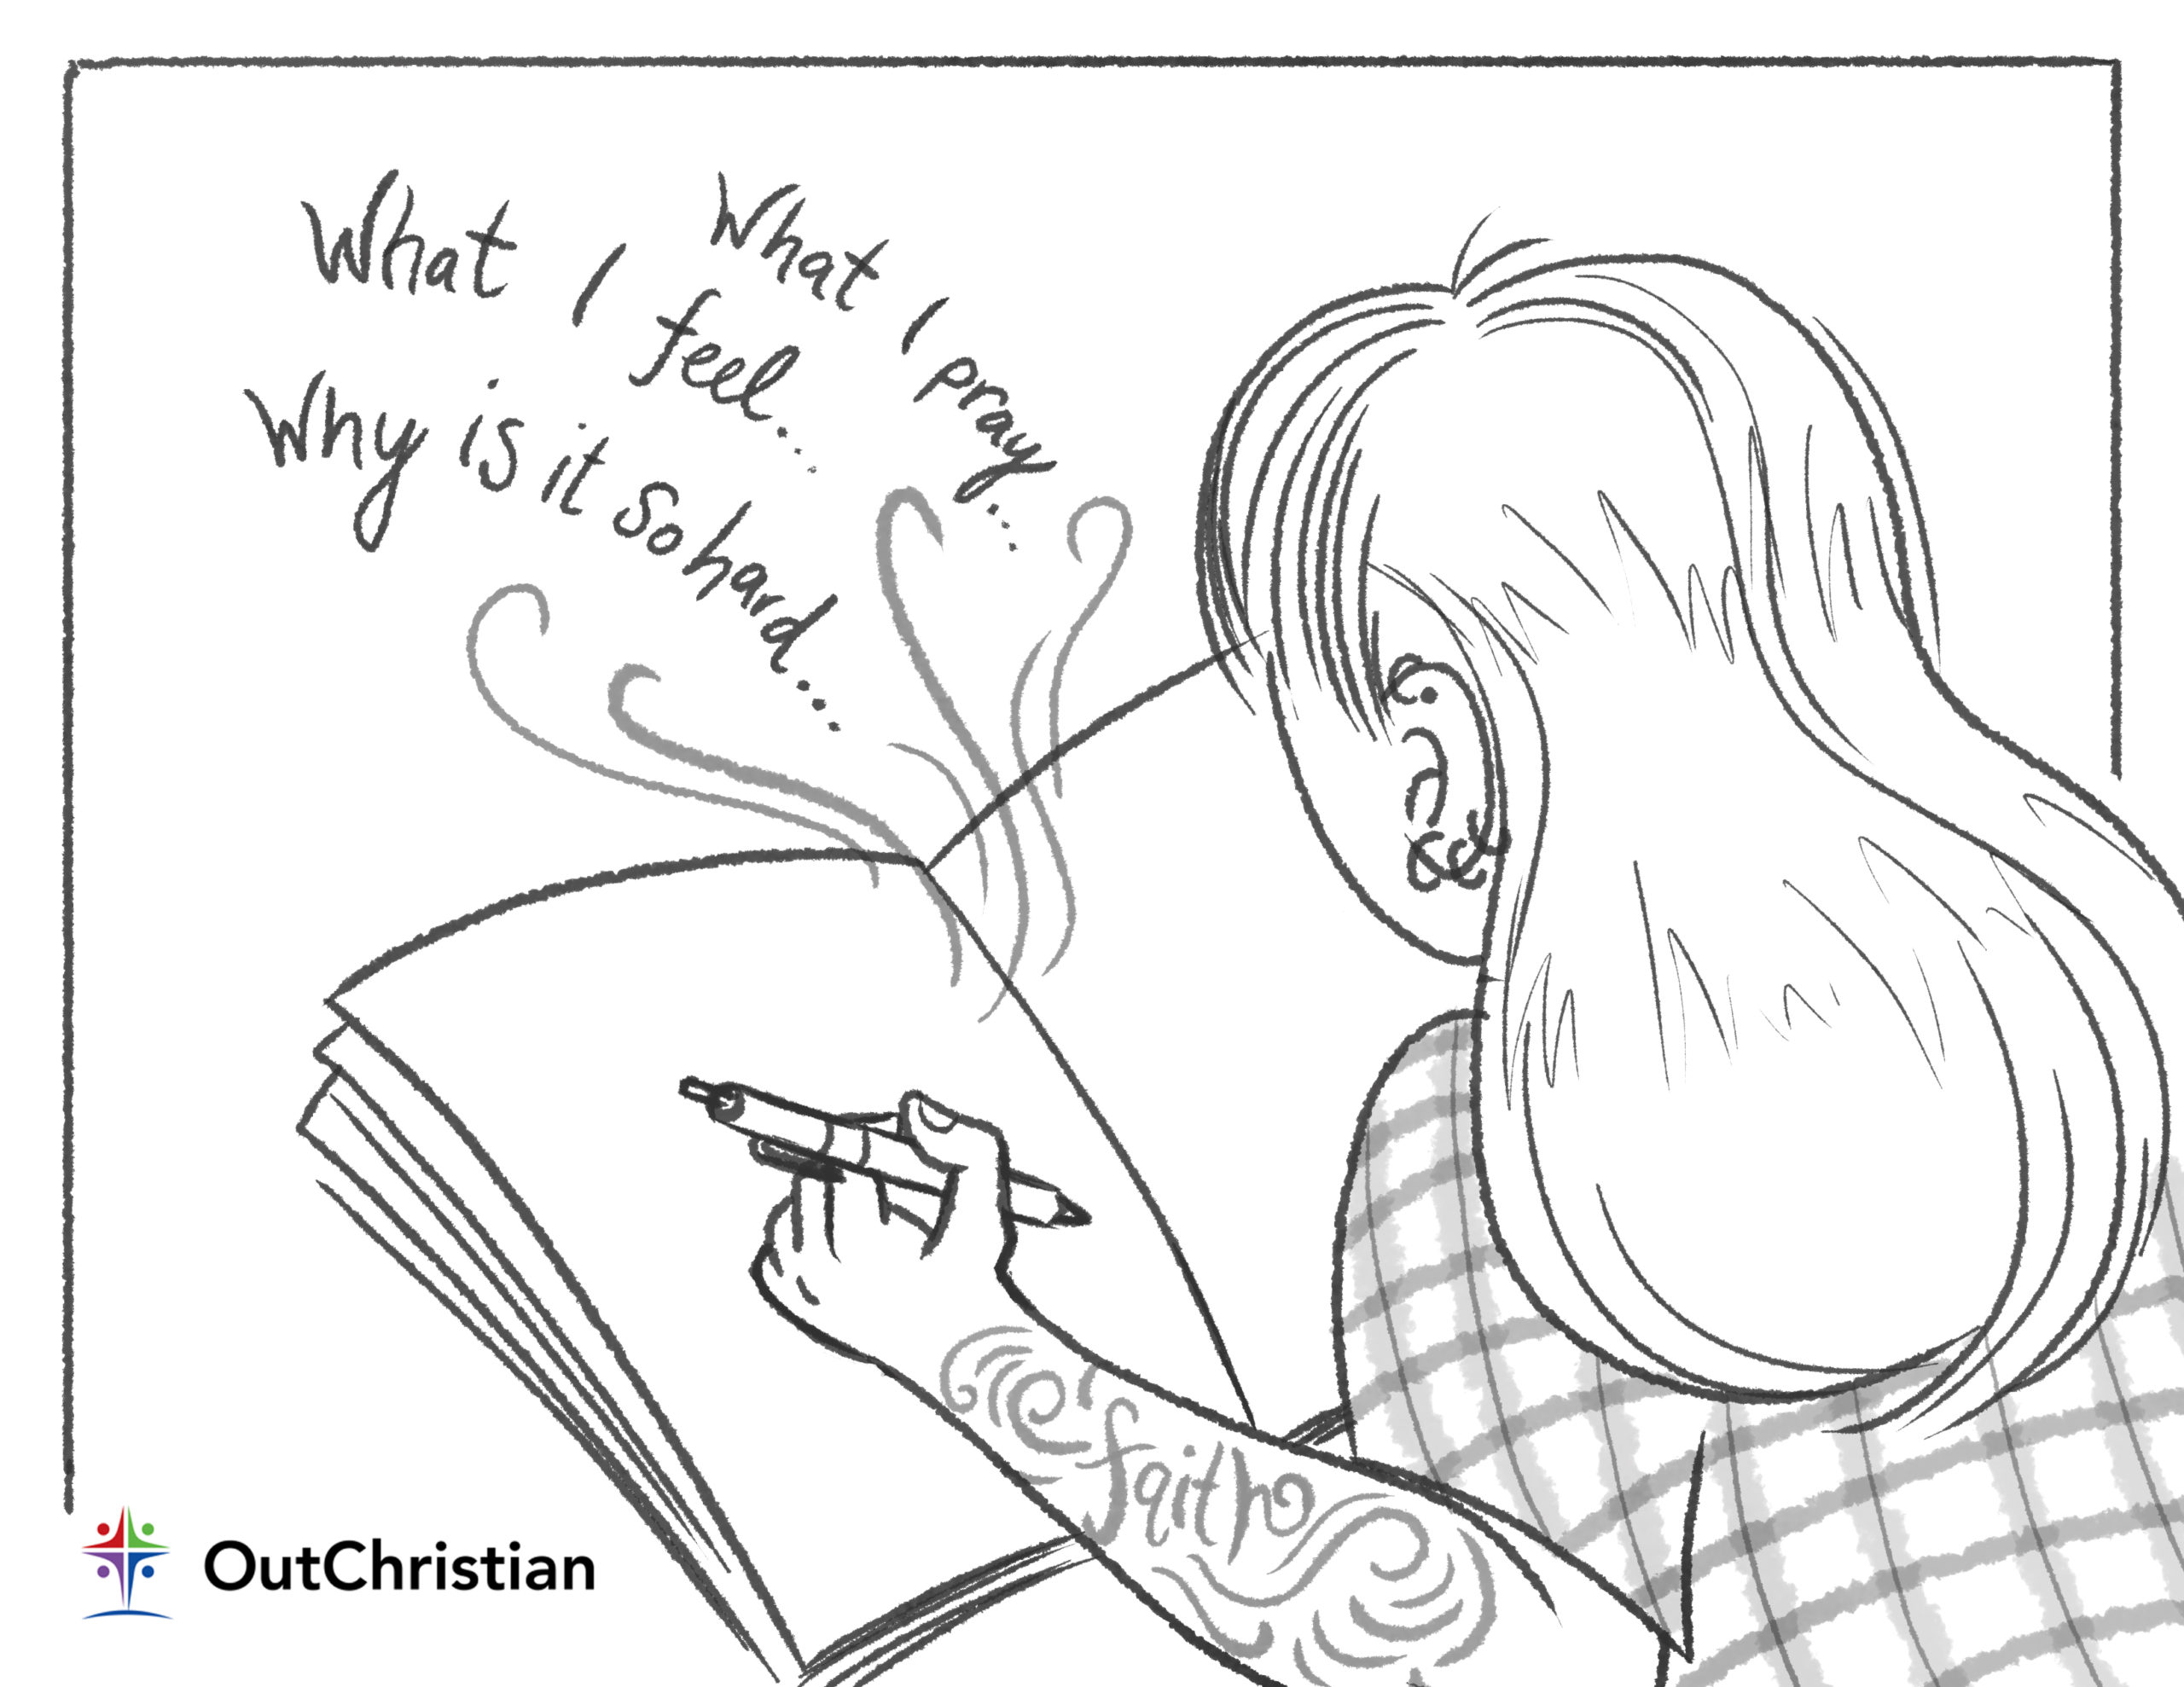 Have Some Fun With These LGBTQ Christian Coloring Pages – OutChristian